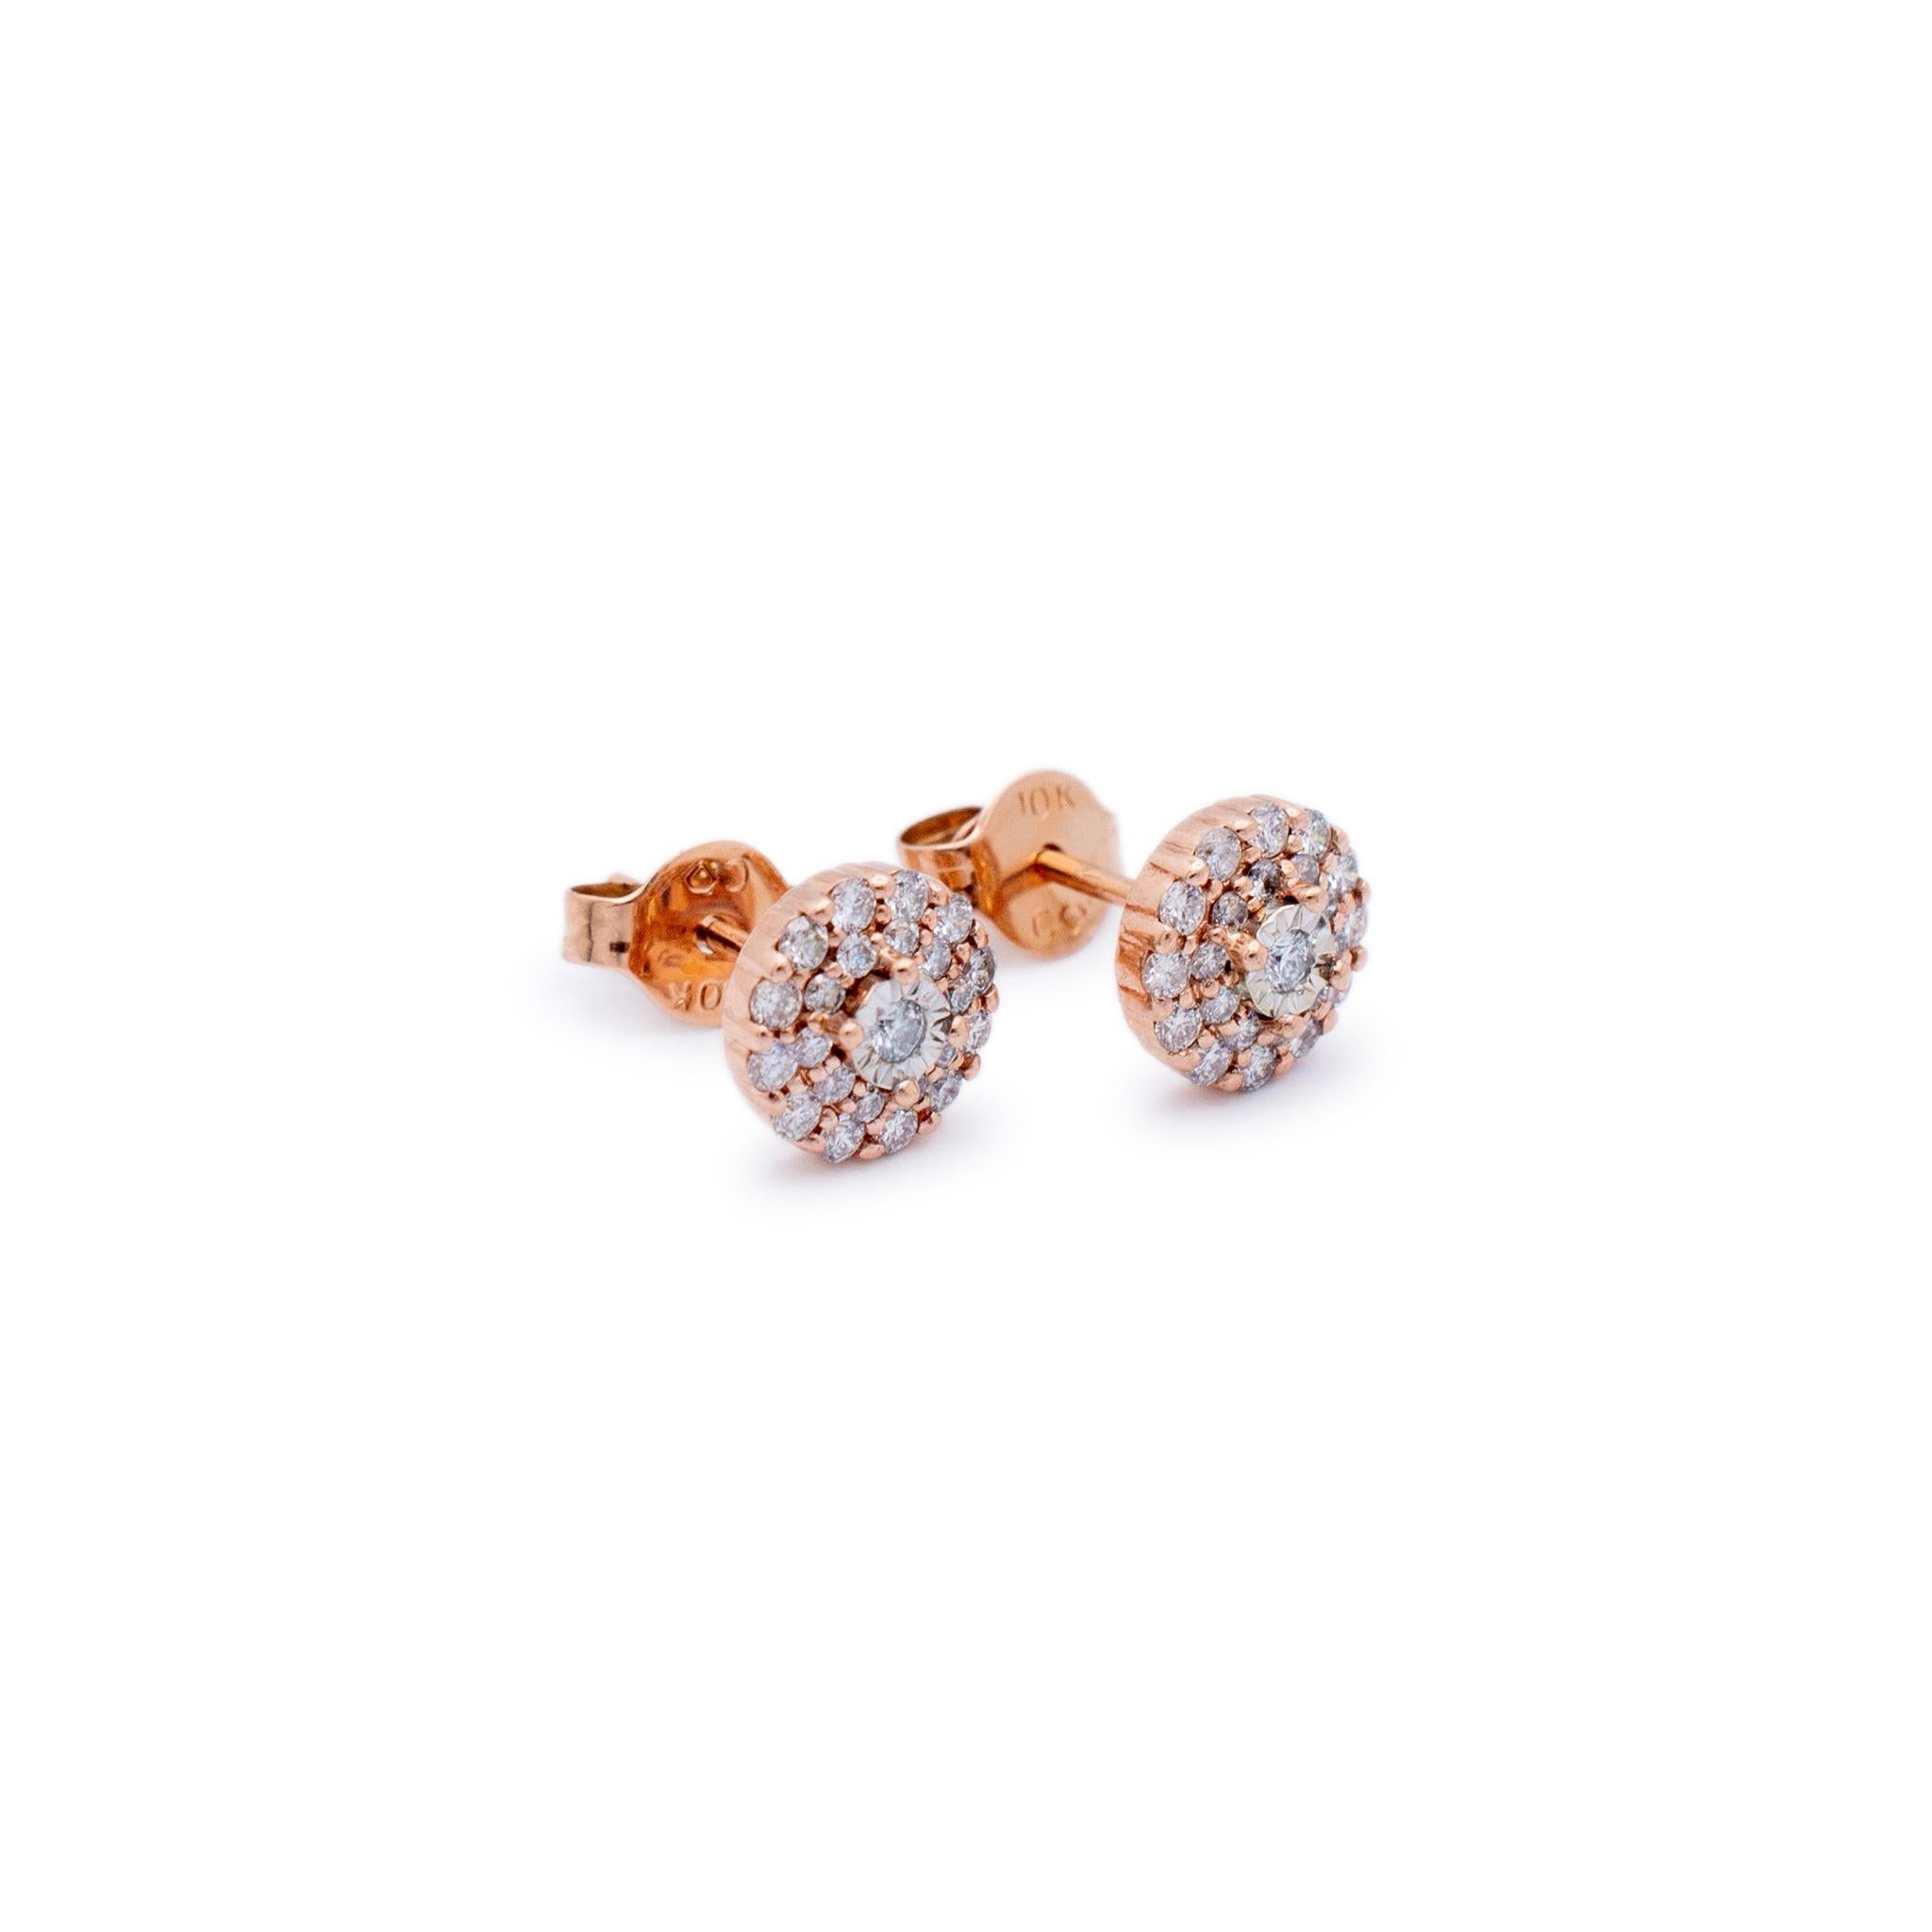 Gender: Ladies

Metal Type: 10K Rose Gold

Length: 0.25 inches

Diameter: 7.55 mm

Weight: 1.51 grams

One pair of ladies  10K rose gold, diamond stud, cluster, halo earrings with push backs. Engraved with 